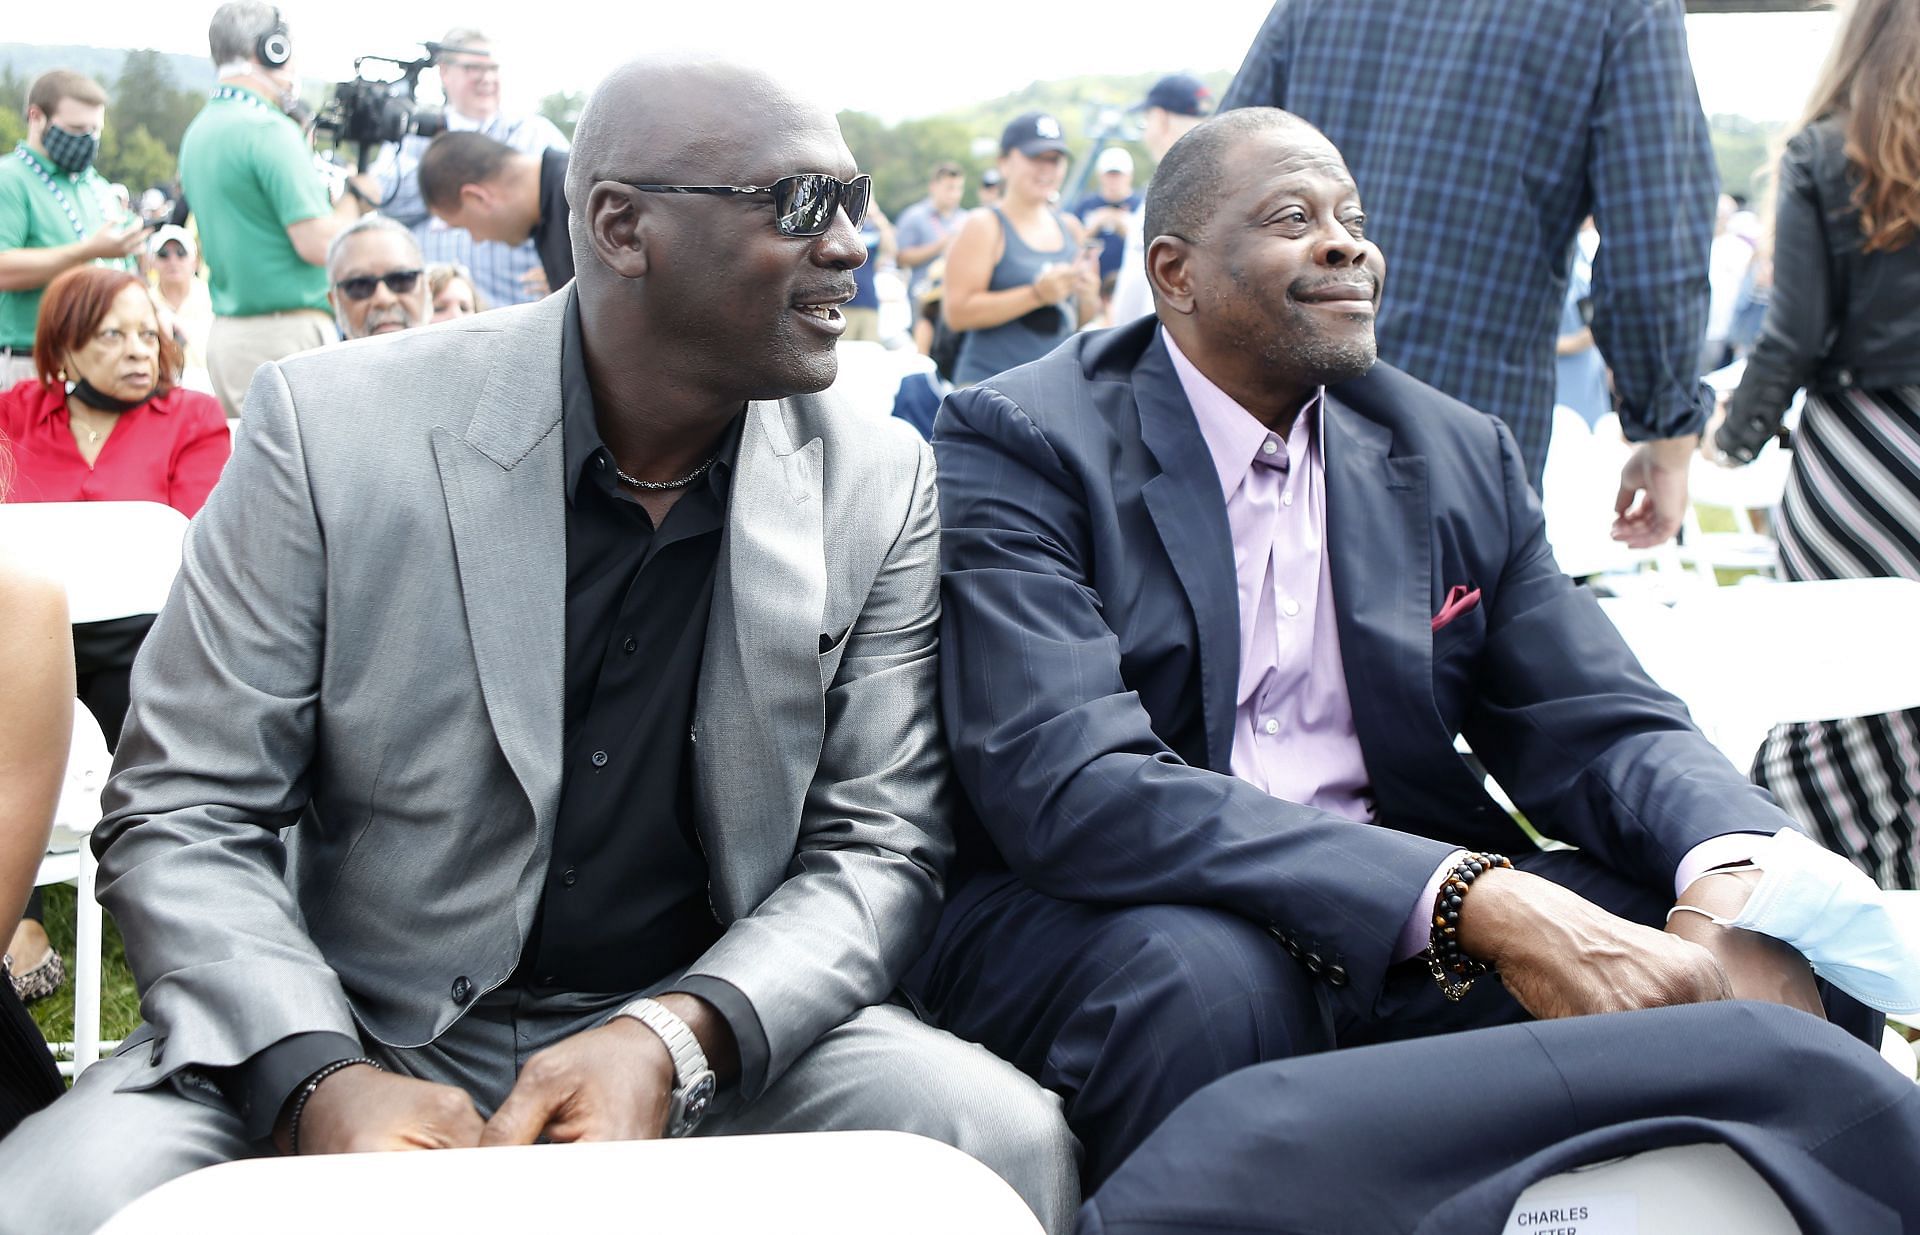 Patrick Ewing and Michael Jordan were drafted a year apart of each other.